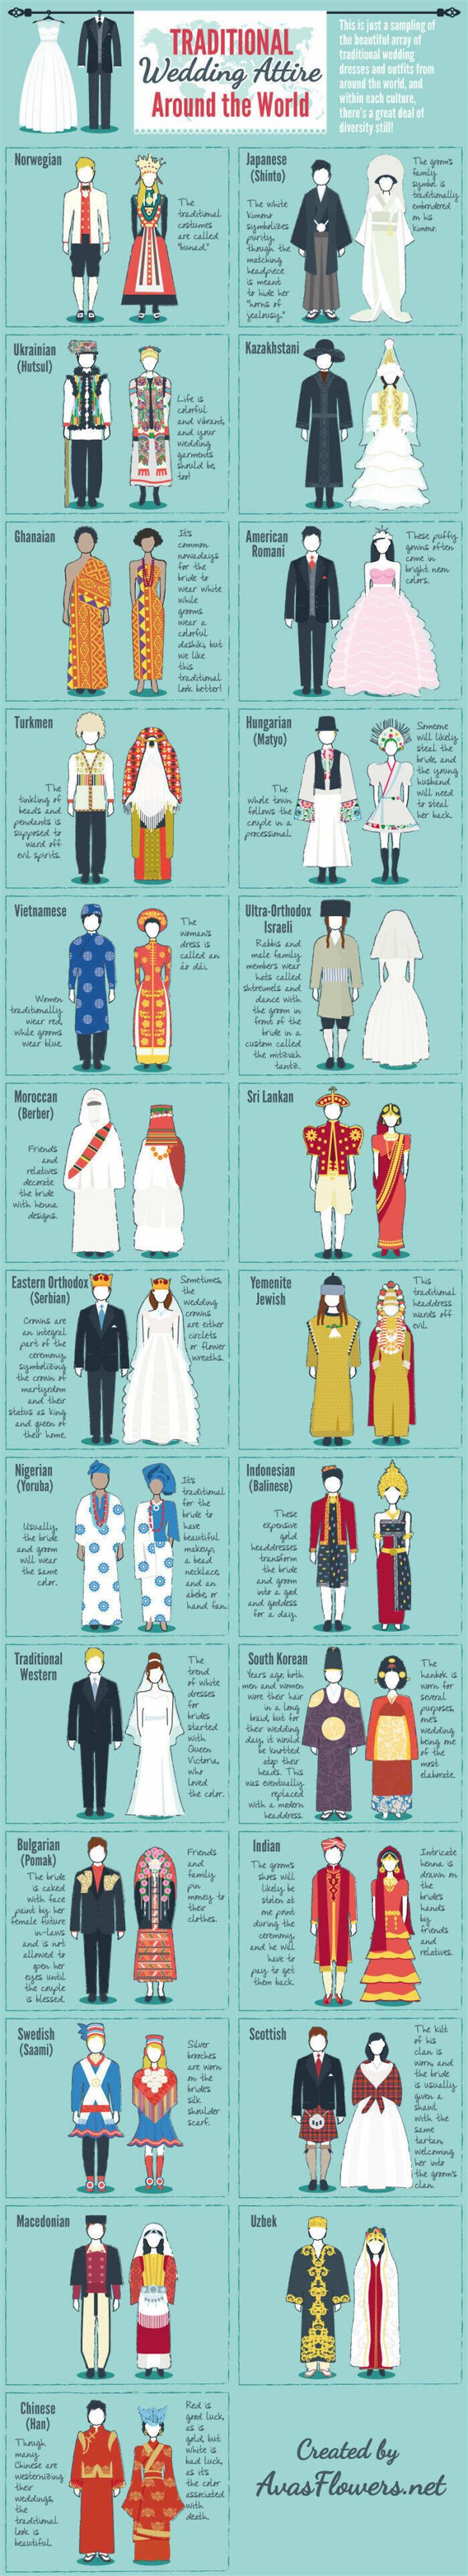 Clothing and Laundry Guide traditional wedding attire